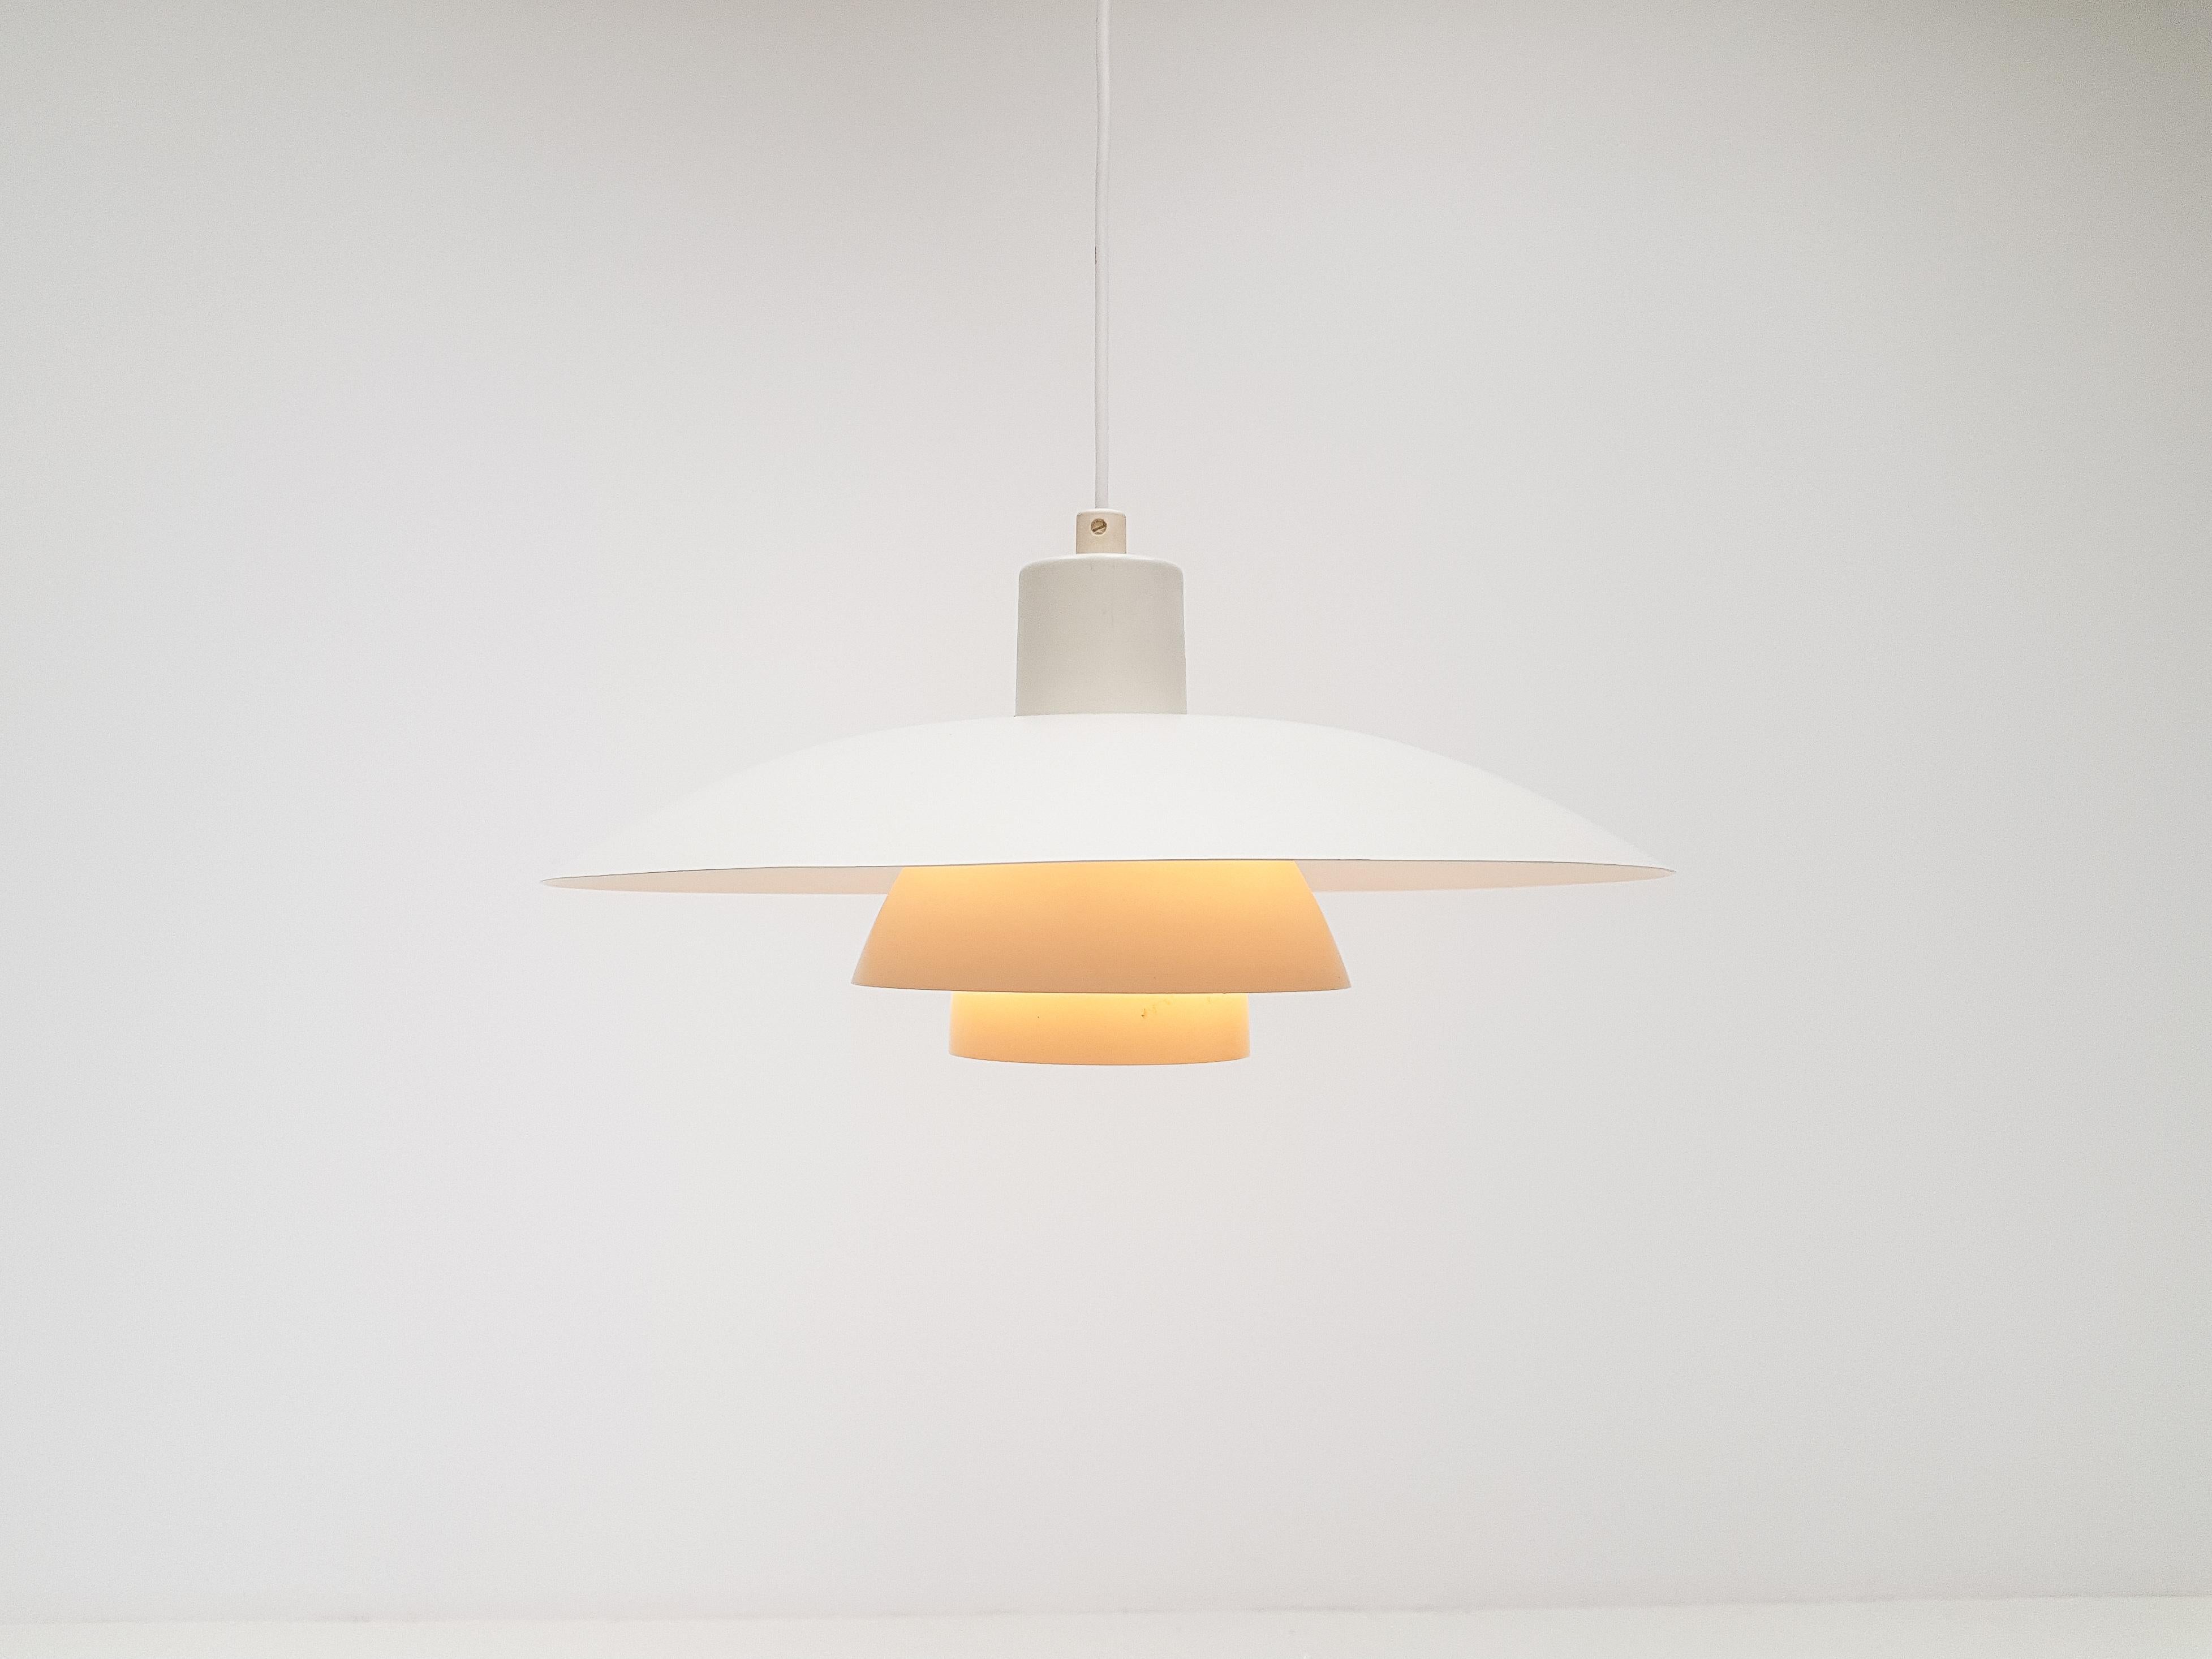 Poul Henningsen for Louis Poulsen PH4 pendant light 

Iconic Poul Henningsen designed Louis Poulsen produced PH4 pendant white lacquered aluminium fixture is designed based on the principle of a reflective three-shade system, which directs light